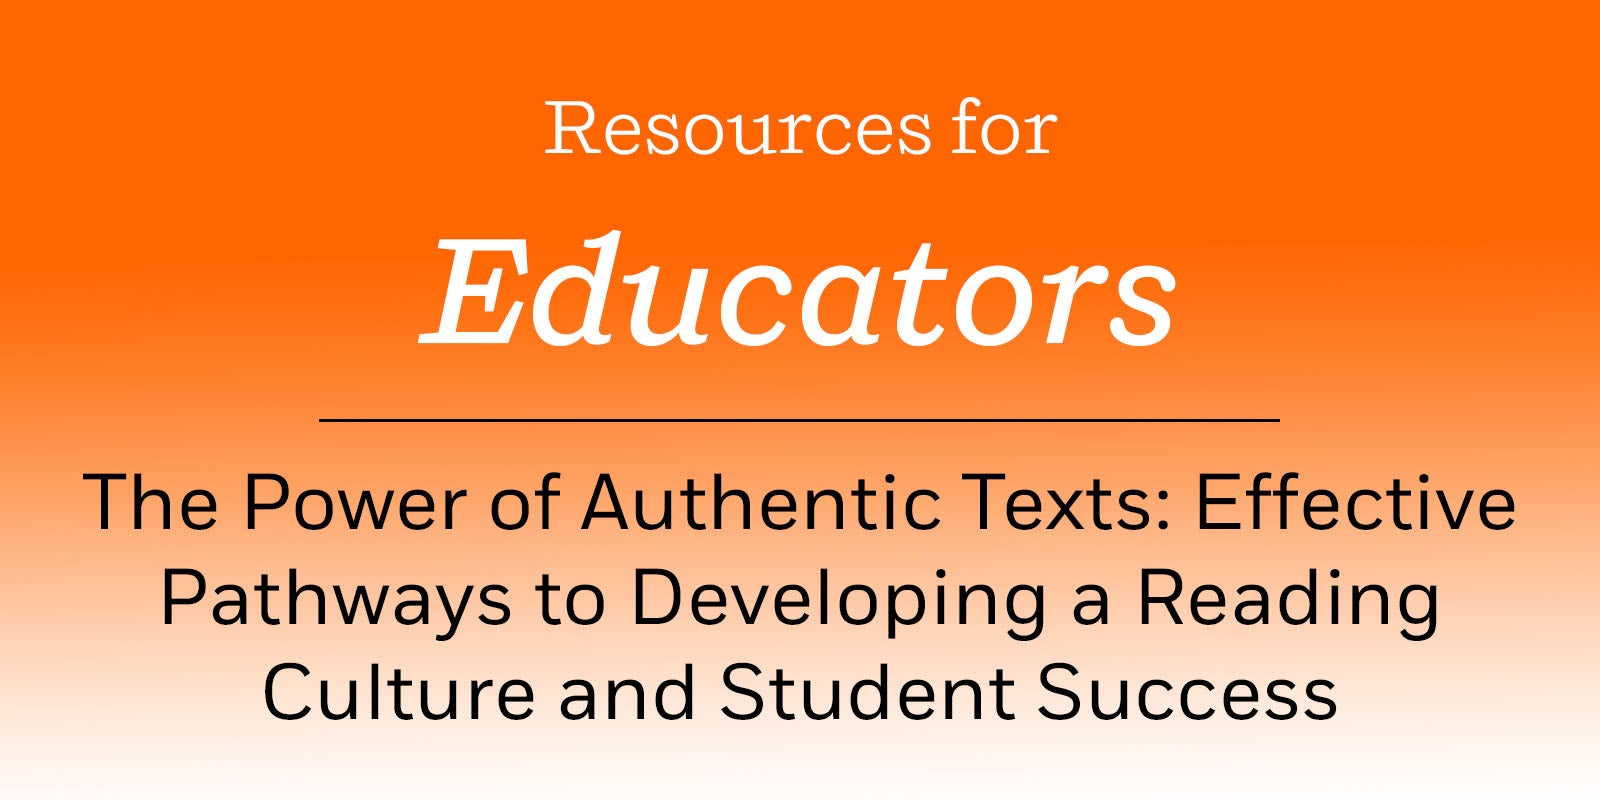 The Power of Authentic Texts: Effective Pathways to Developing a Reading Culture and Student Success